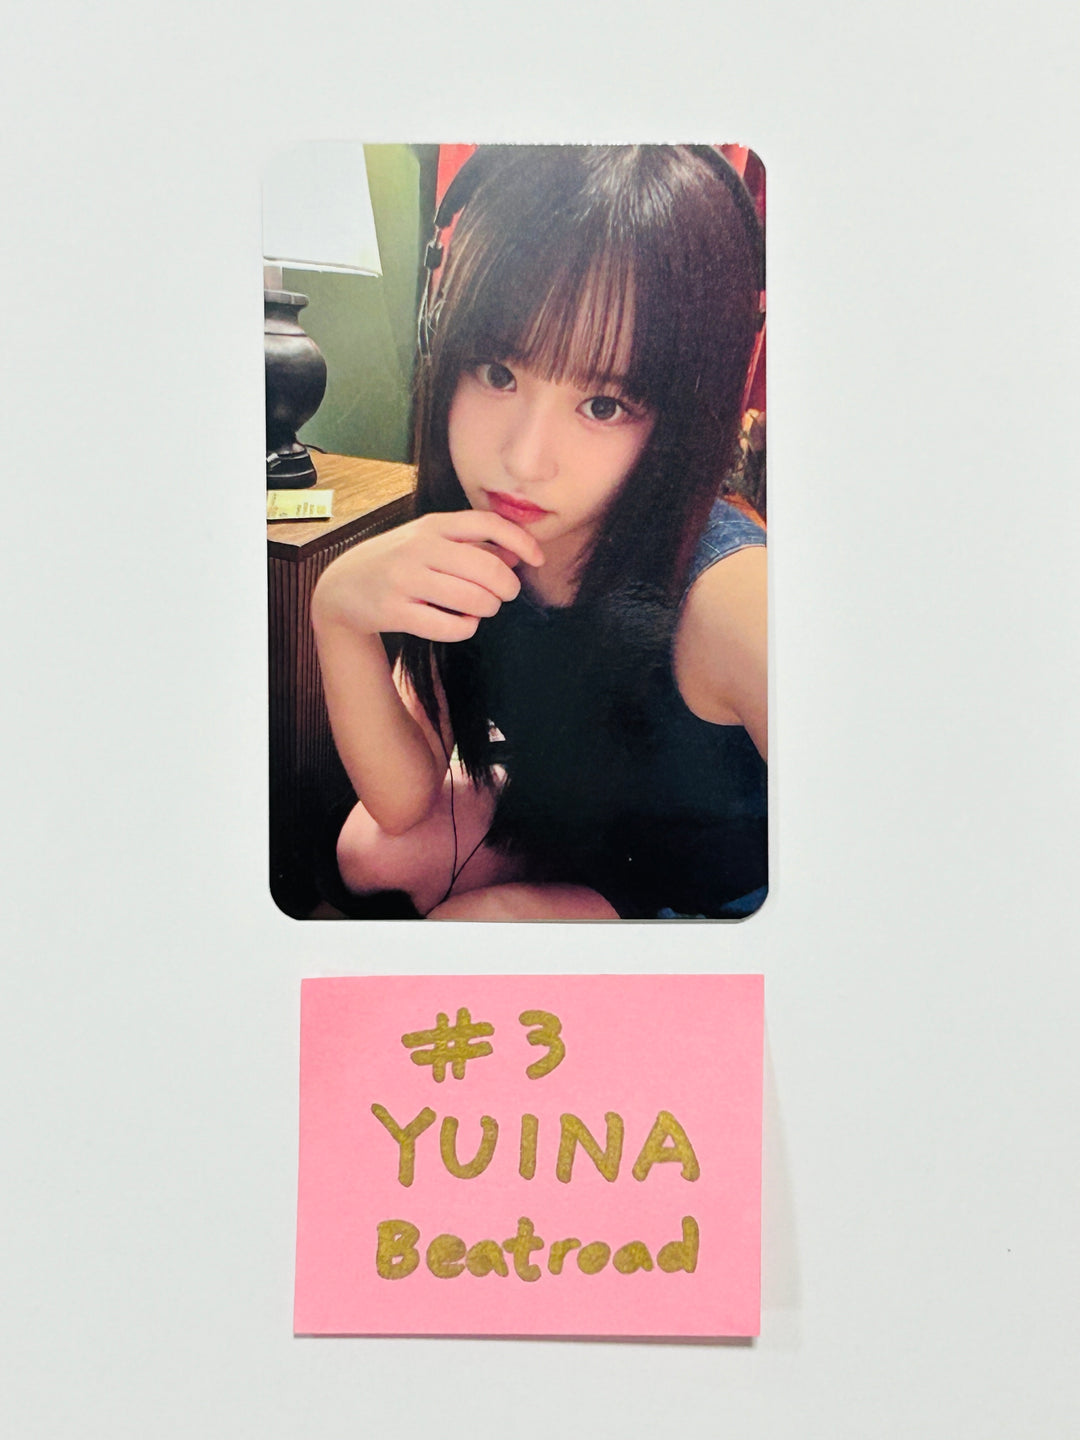 Candy Shop "Hashtag#" - Beatroad Fansign Event Photocard [24.4.15]